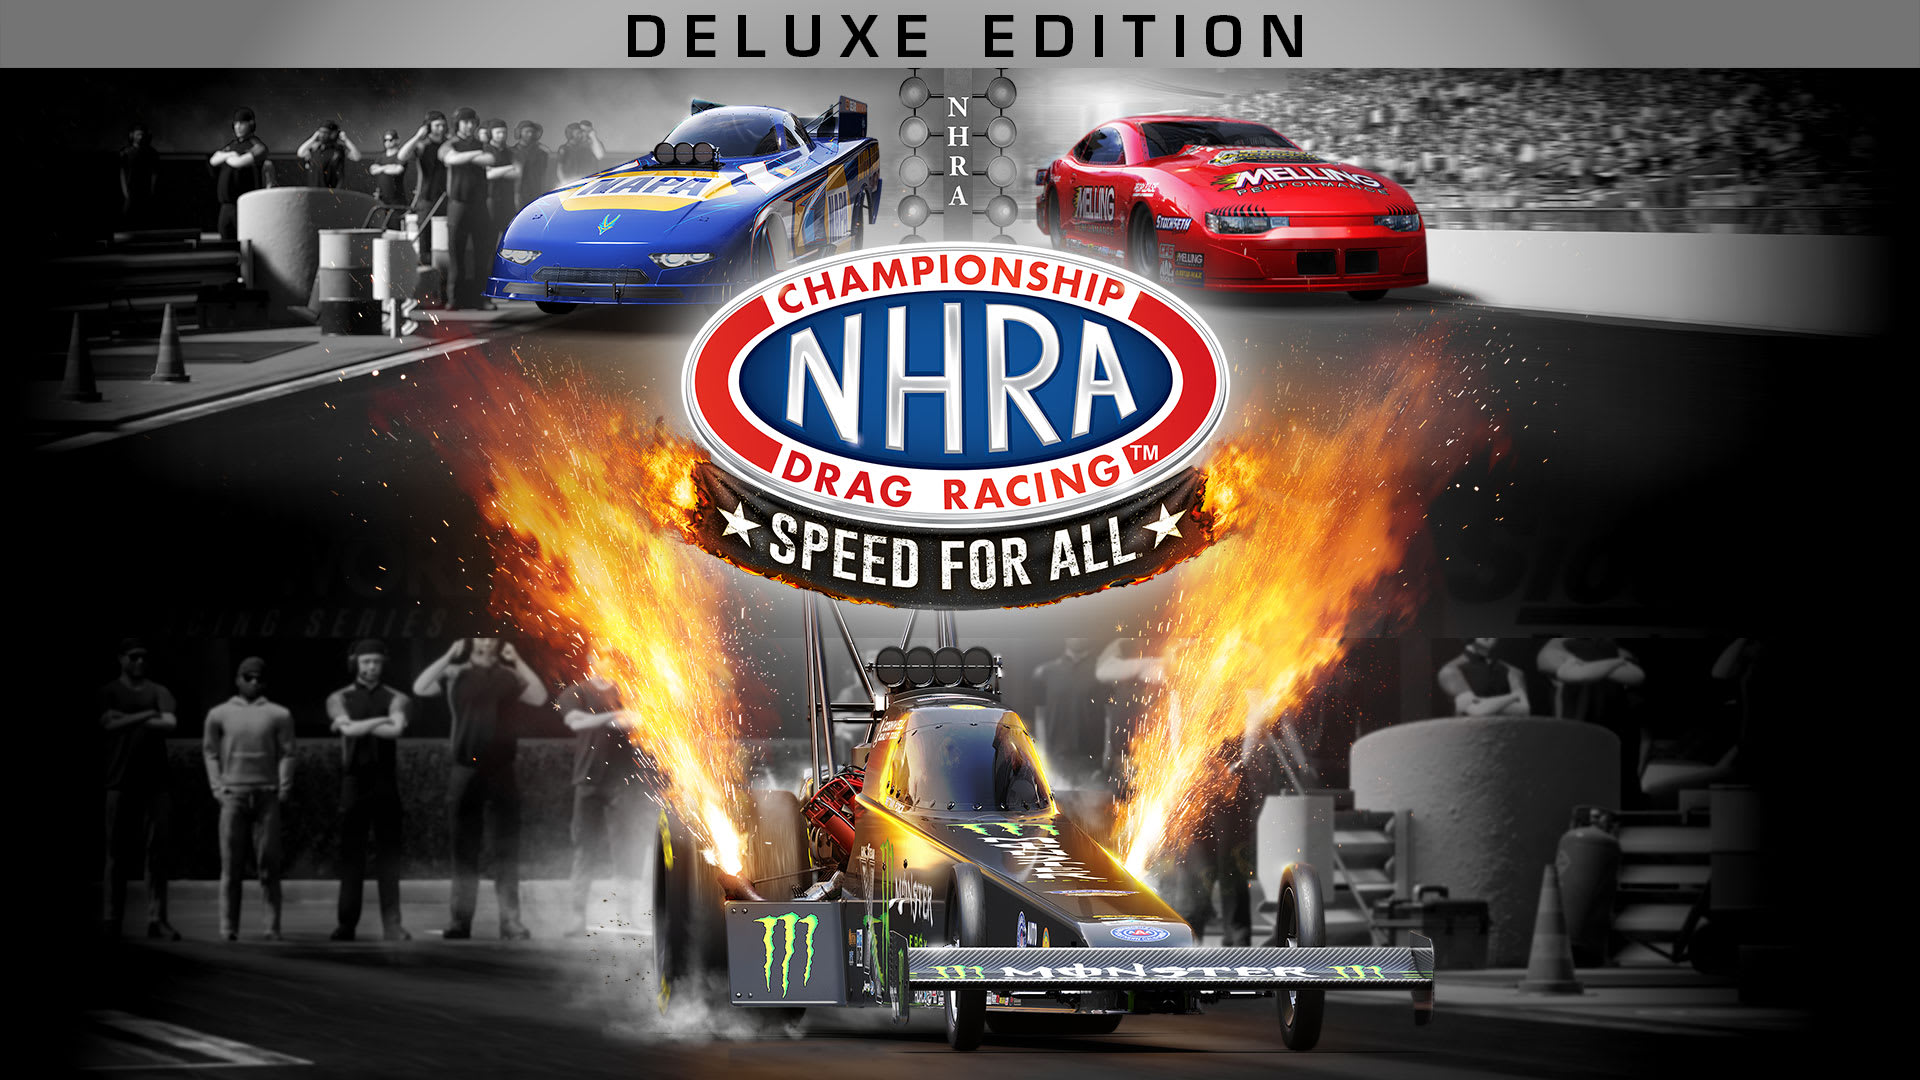 NHRA Championship Drag Racing: Speed for All - Deluxe Edition